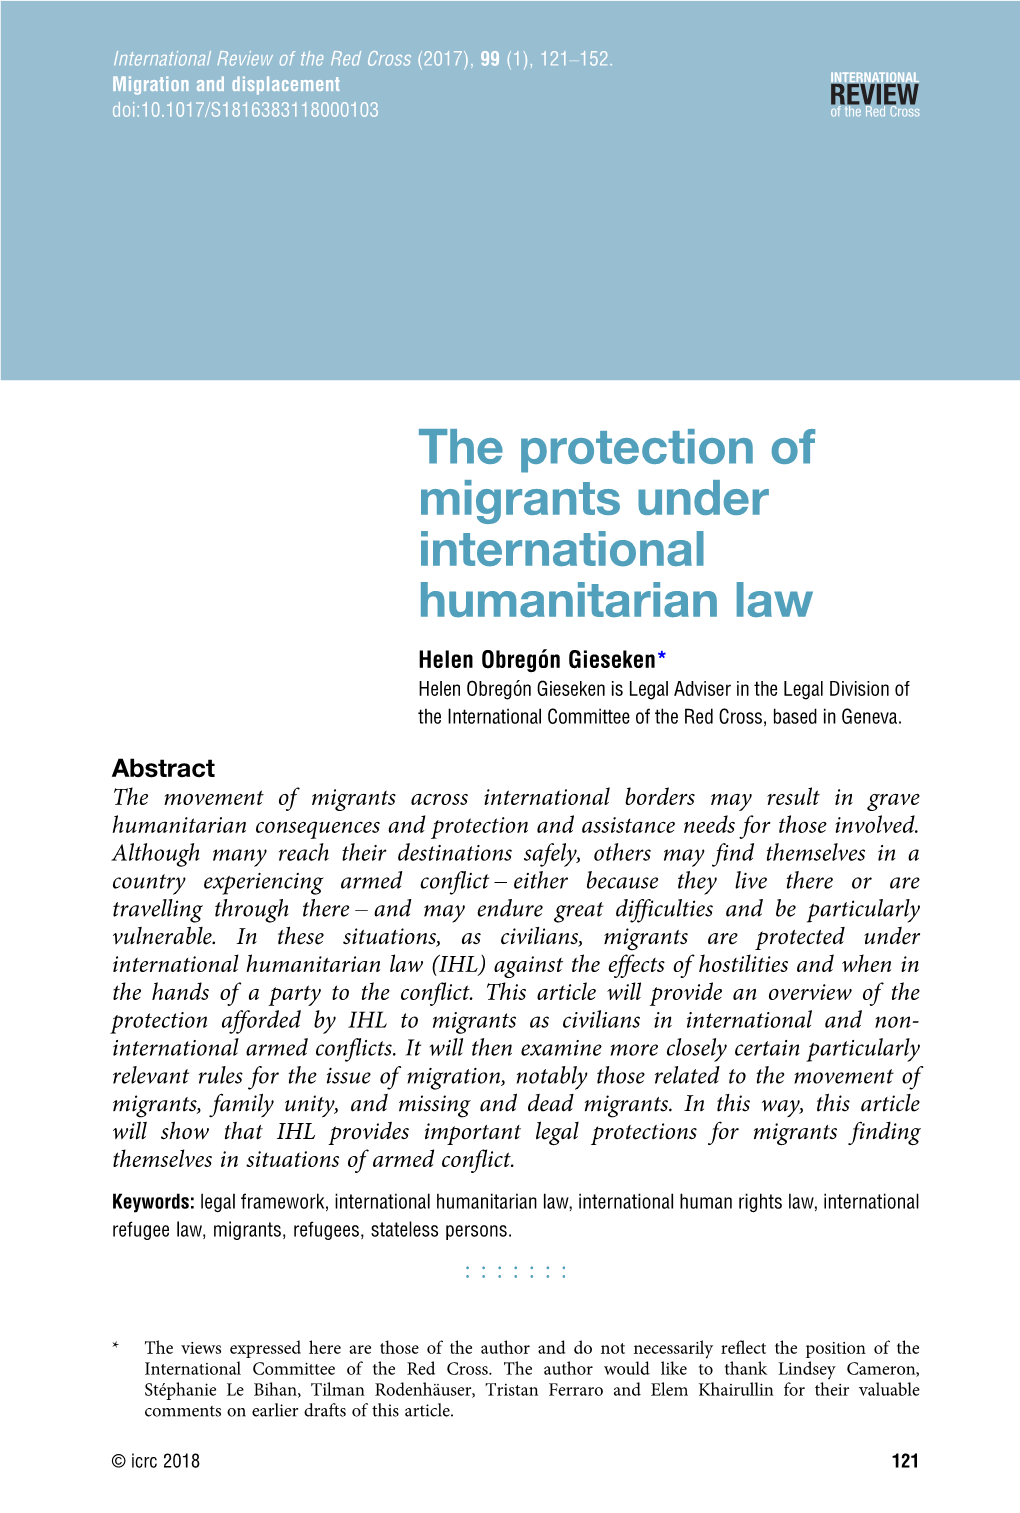 The Protection of Migrants Under International Humanitarian